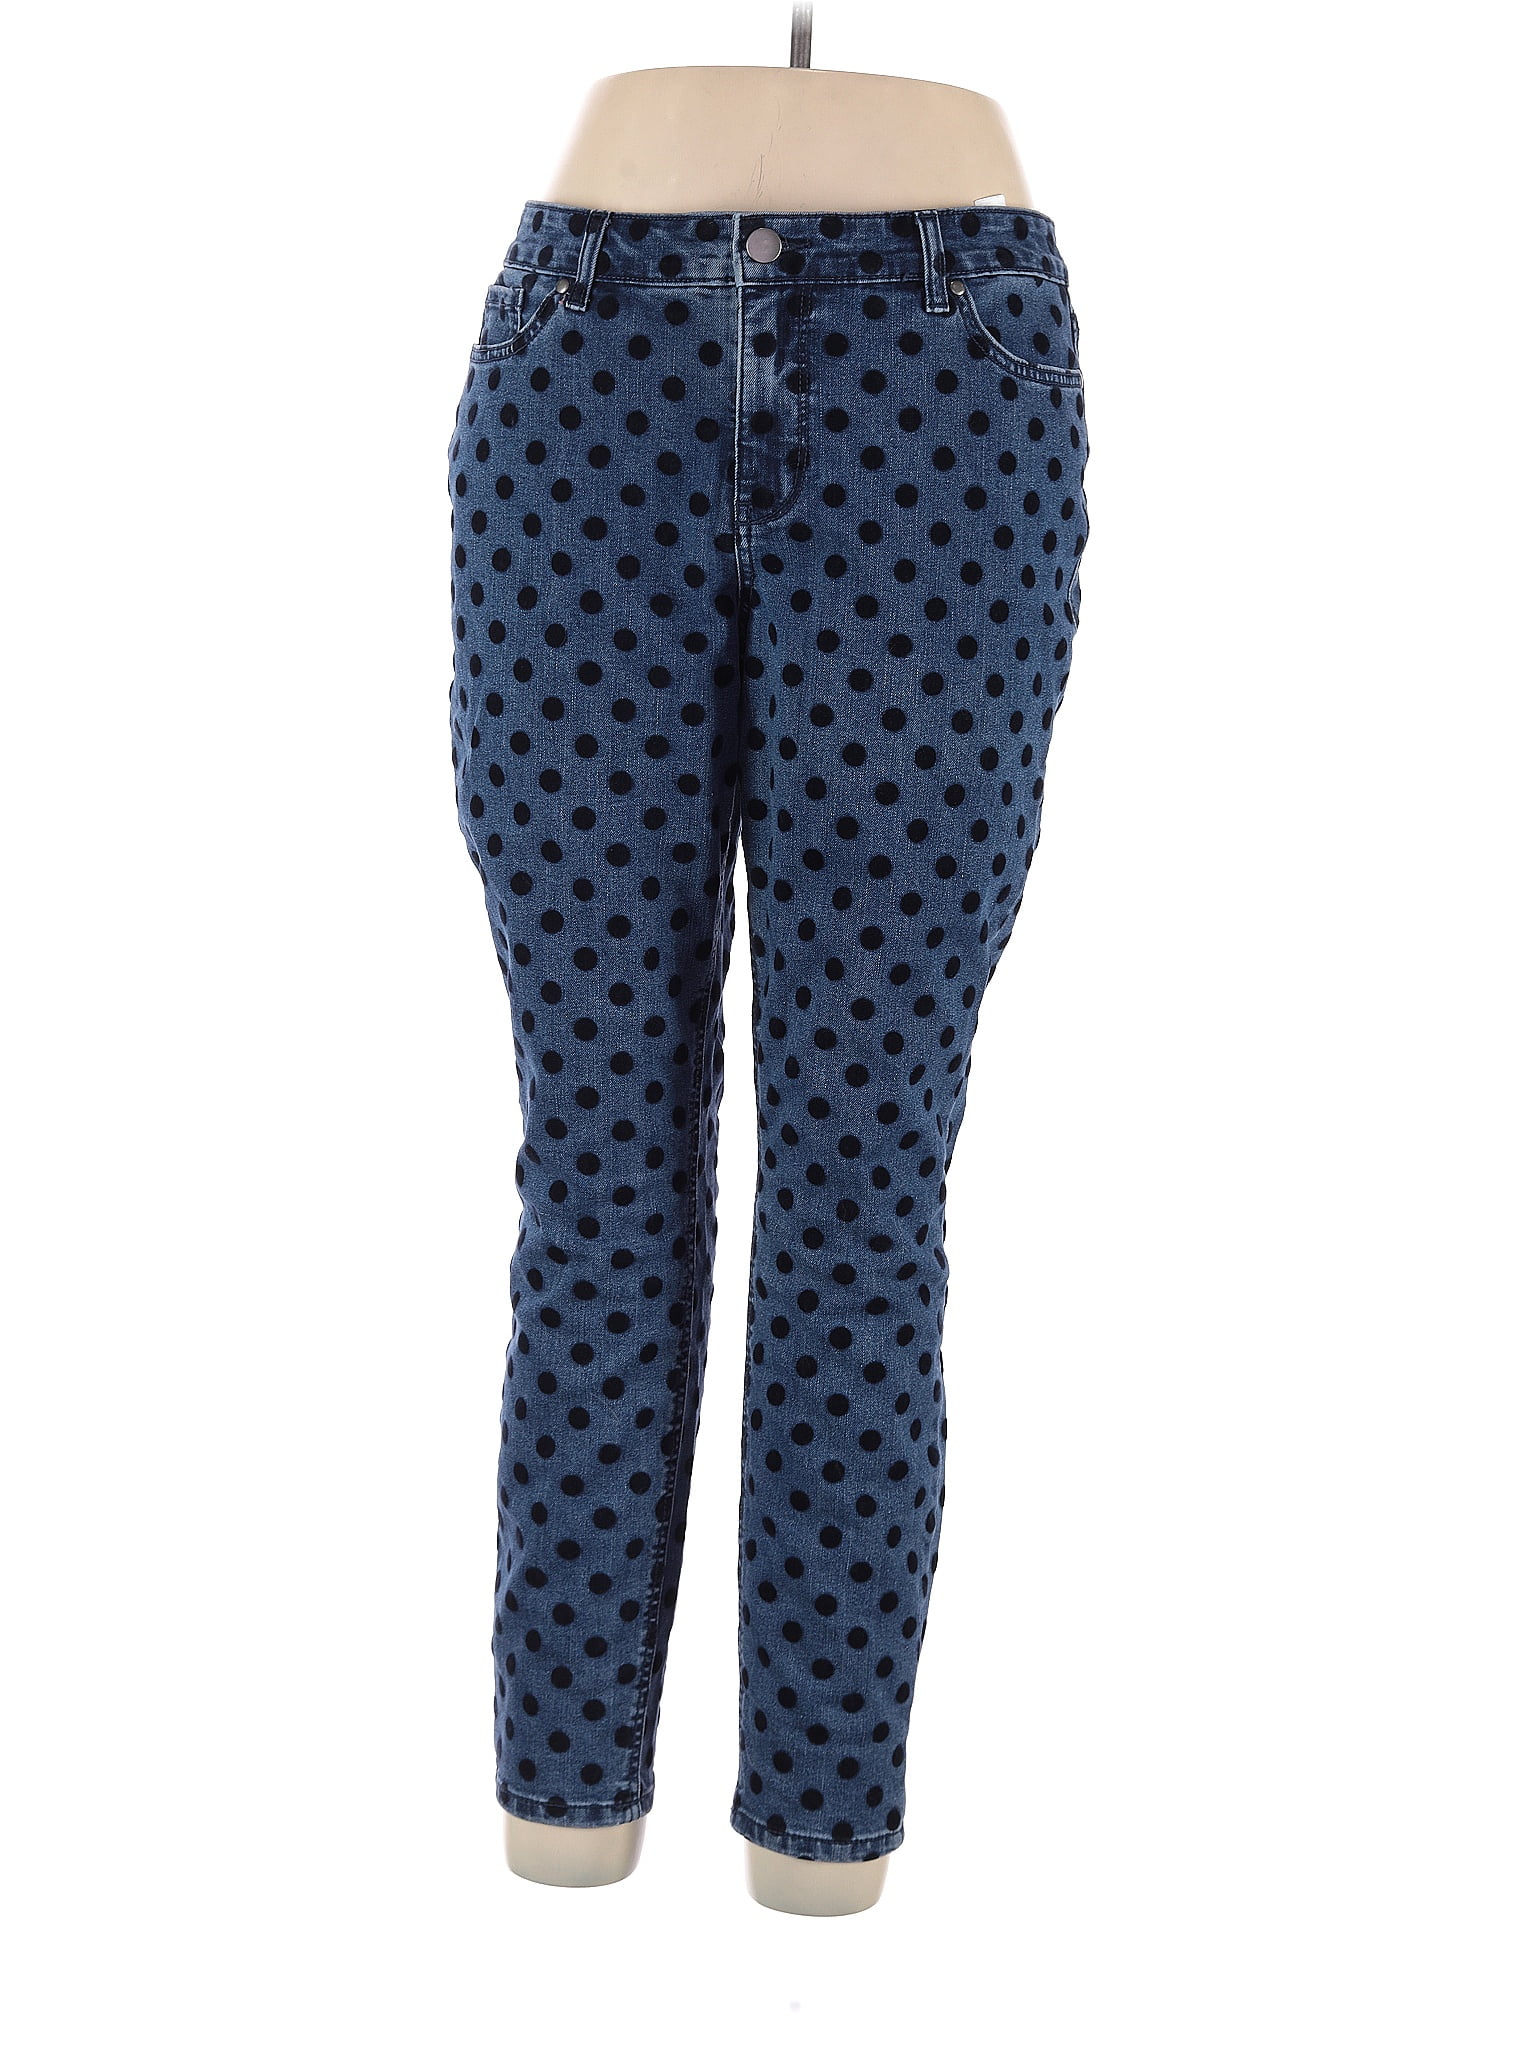 Crown & Ivy Polka Dots Blue Jeans Size 14 - 58% off